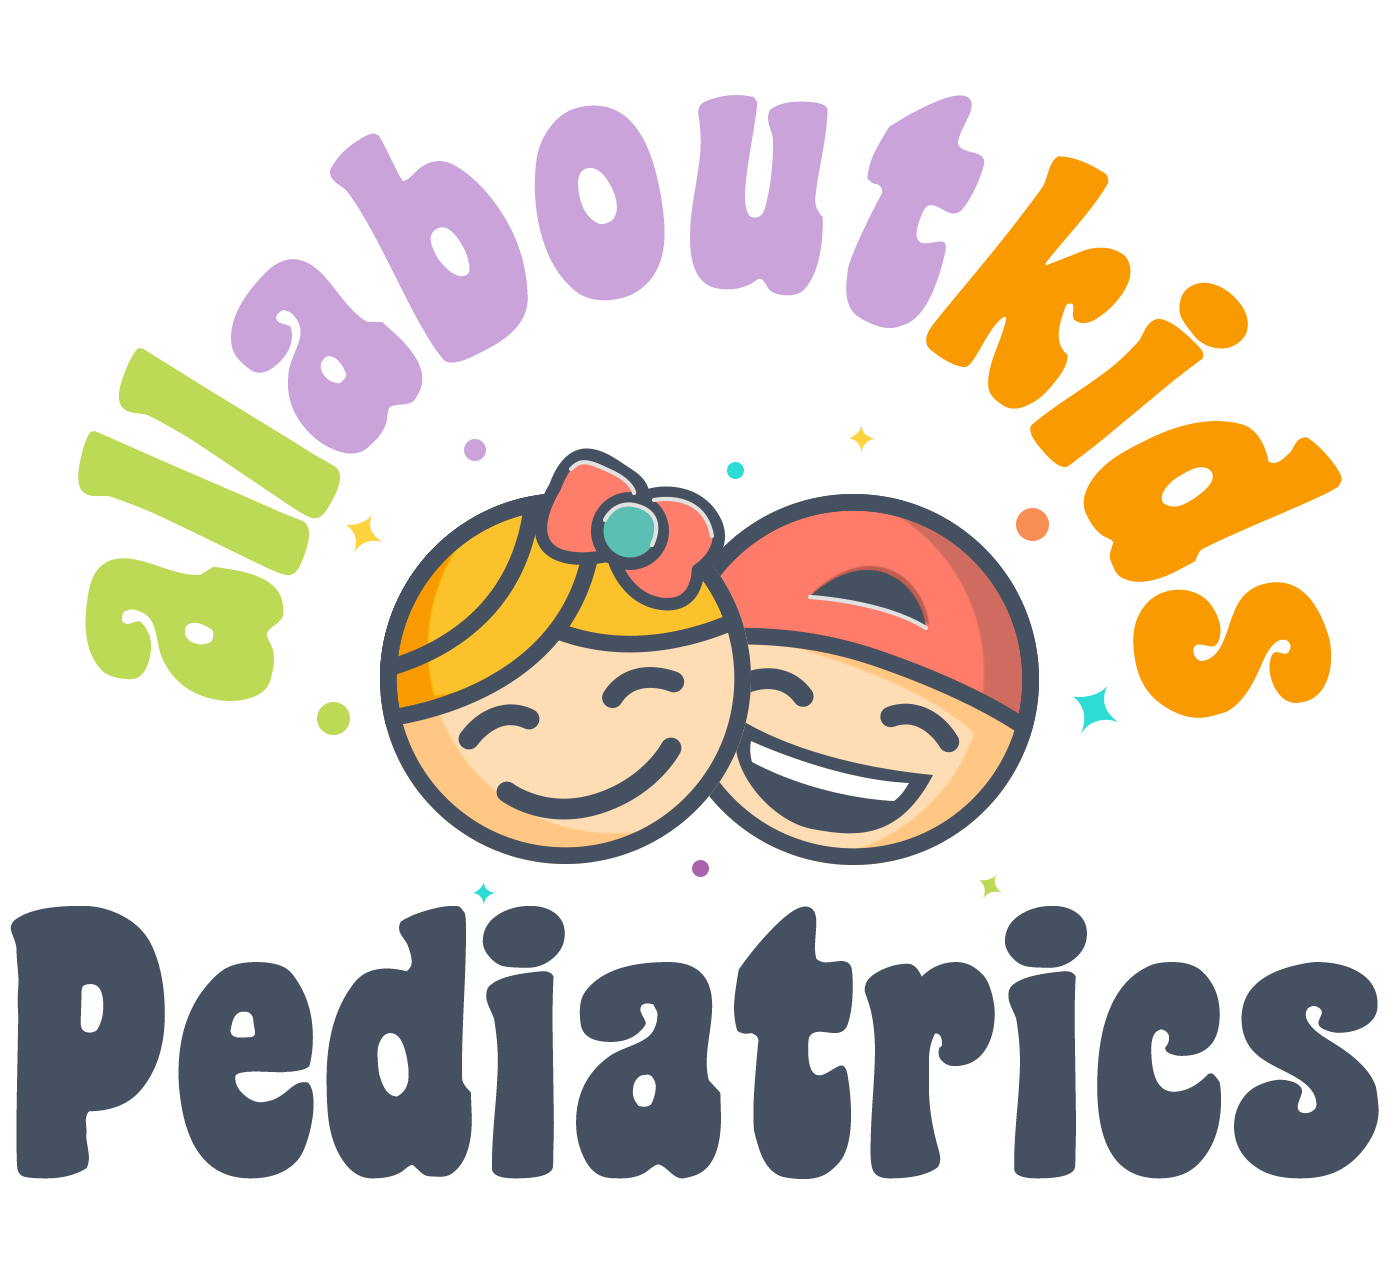 All About Kids Pediatrics in Frederick, MD logo